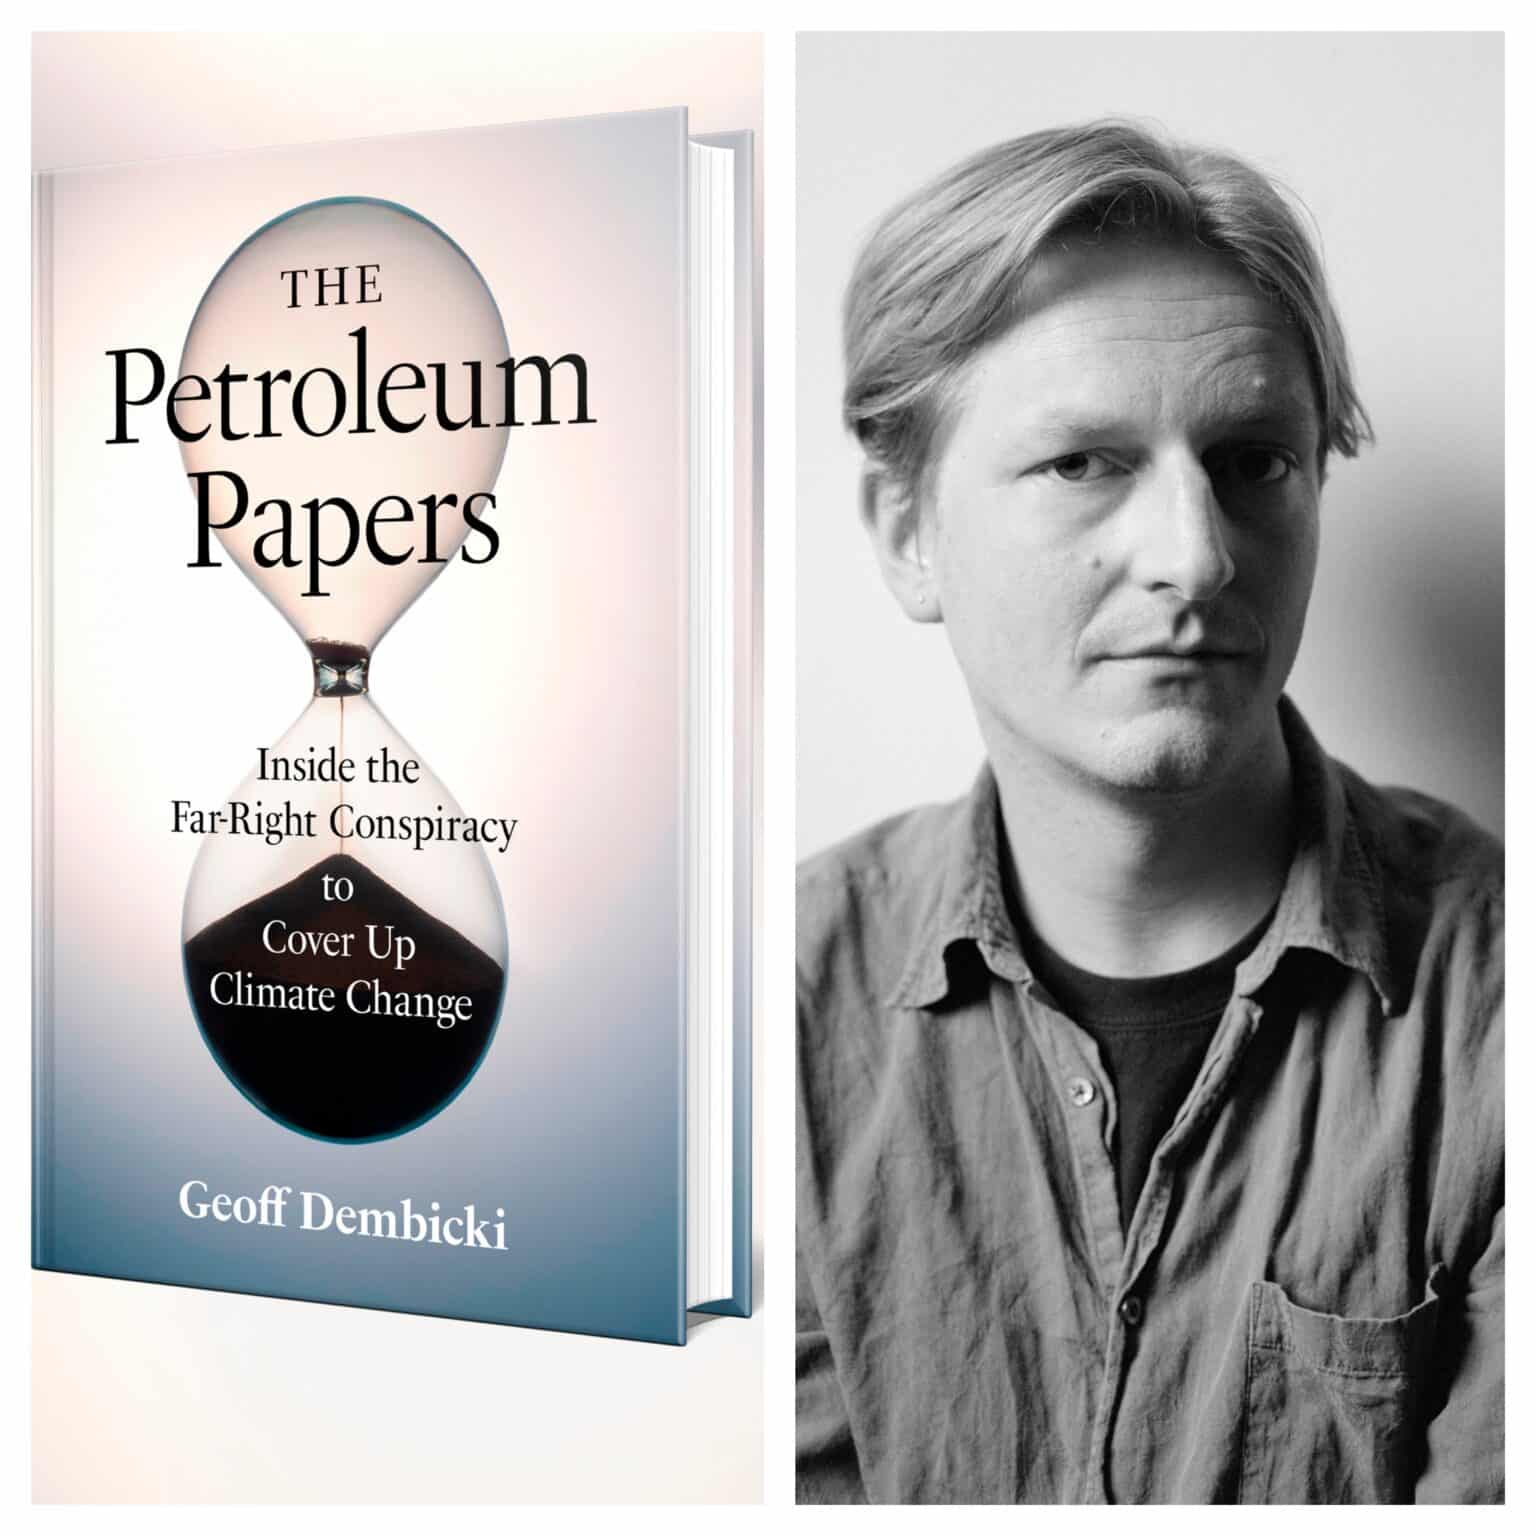 Left, a white-to-gray faded book cover reading 'The Petroleum Papers: Inside the Far-Right Conspiracy To Cover Up Climate Change' over an hourglass with black sand mostly in the bottom bulb. Right, black and white image of a man with medium length hair parted on the side and wearing a button down shirt.